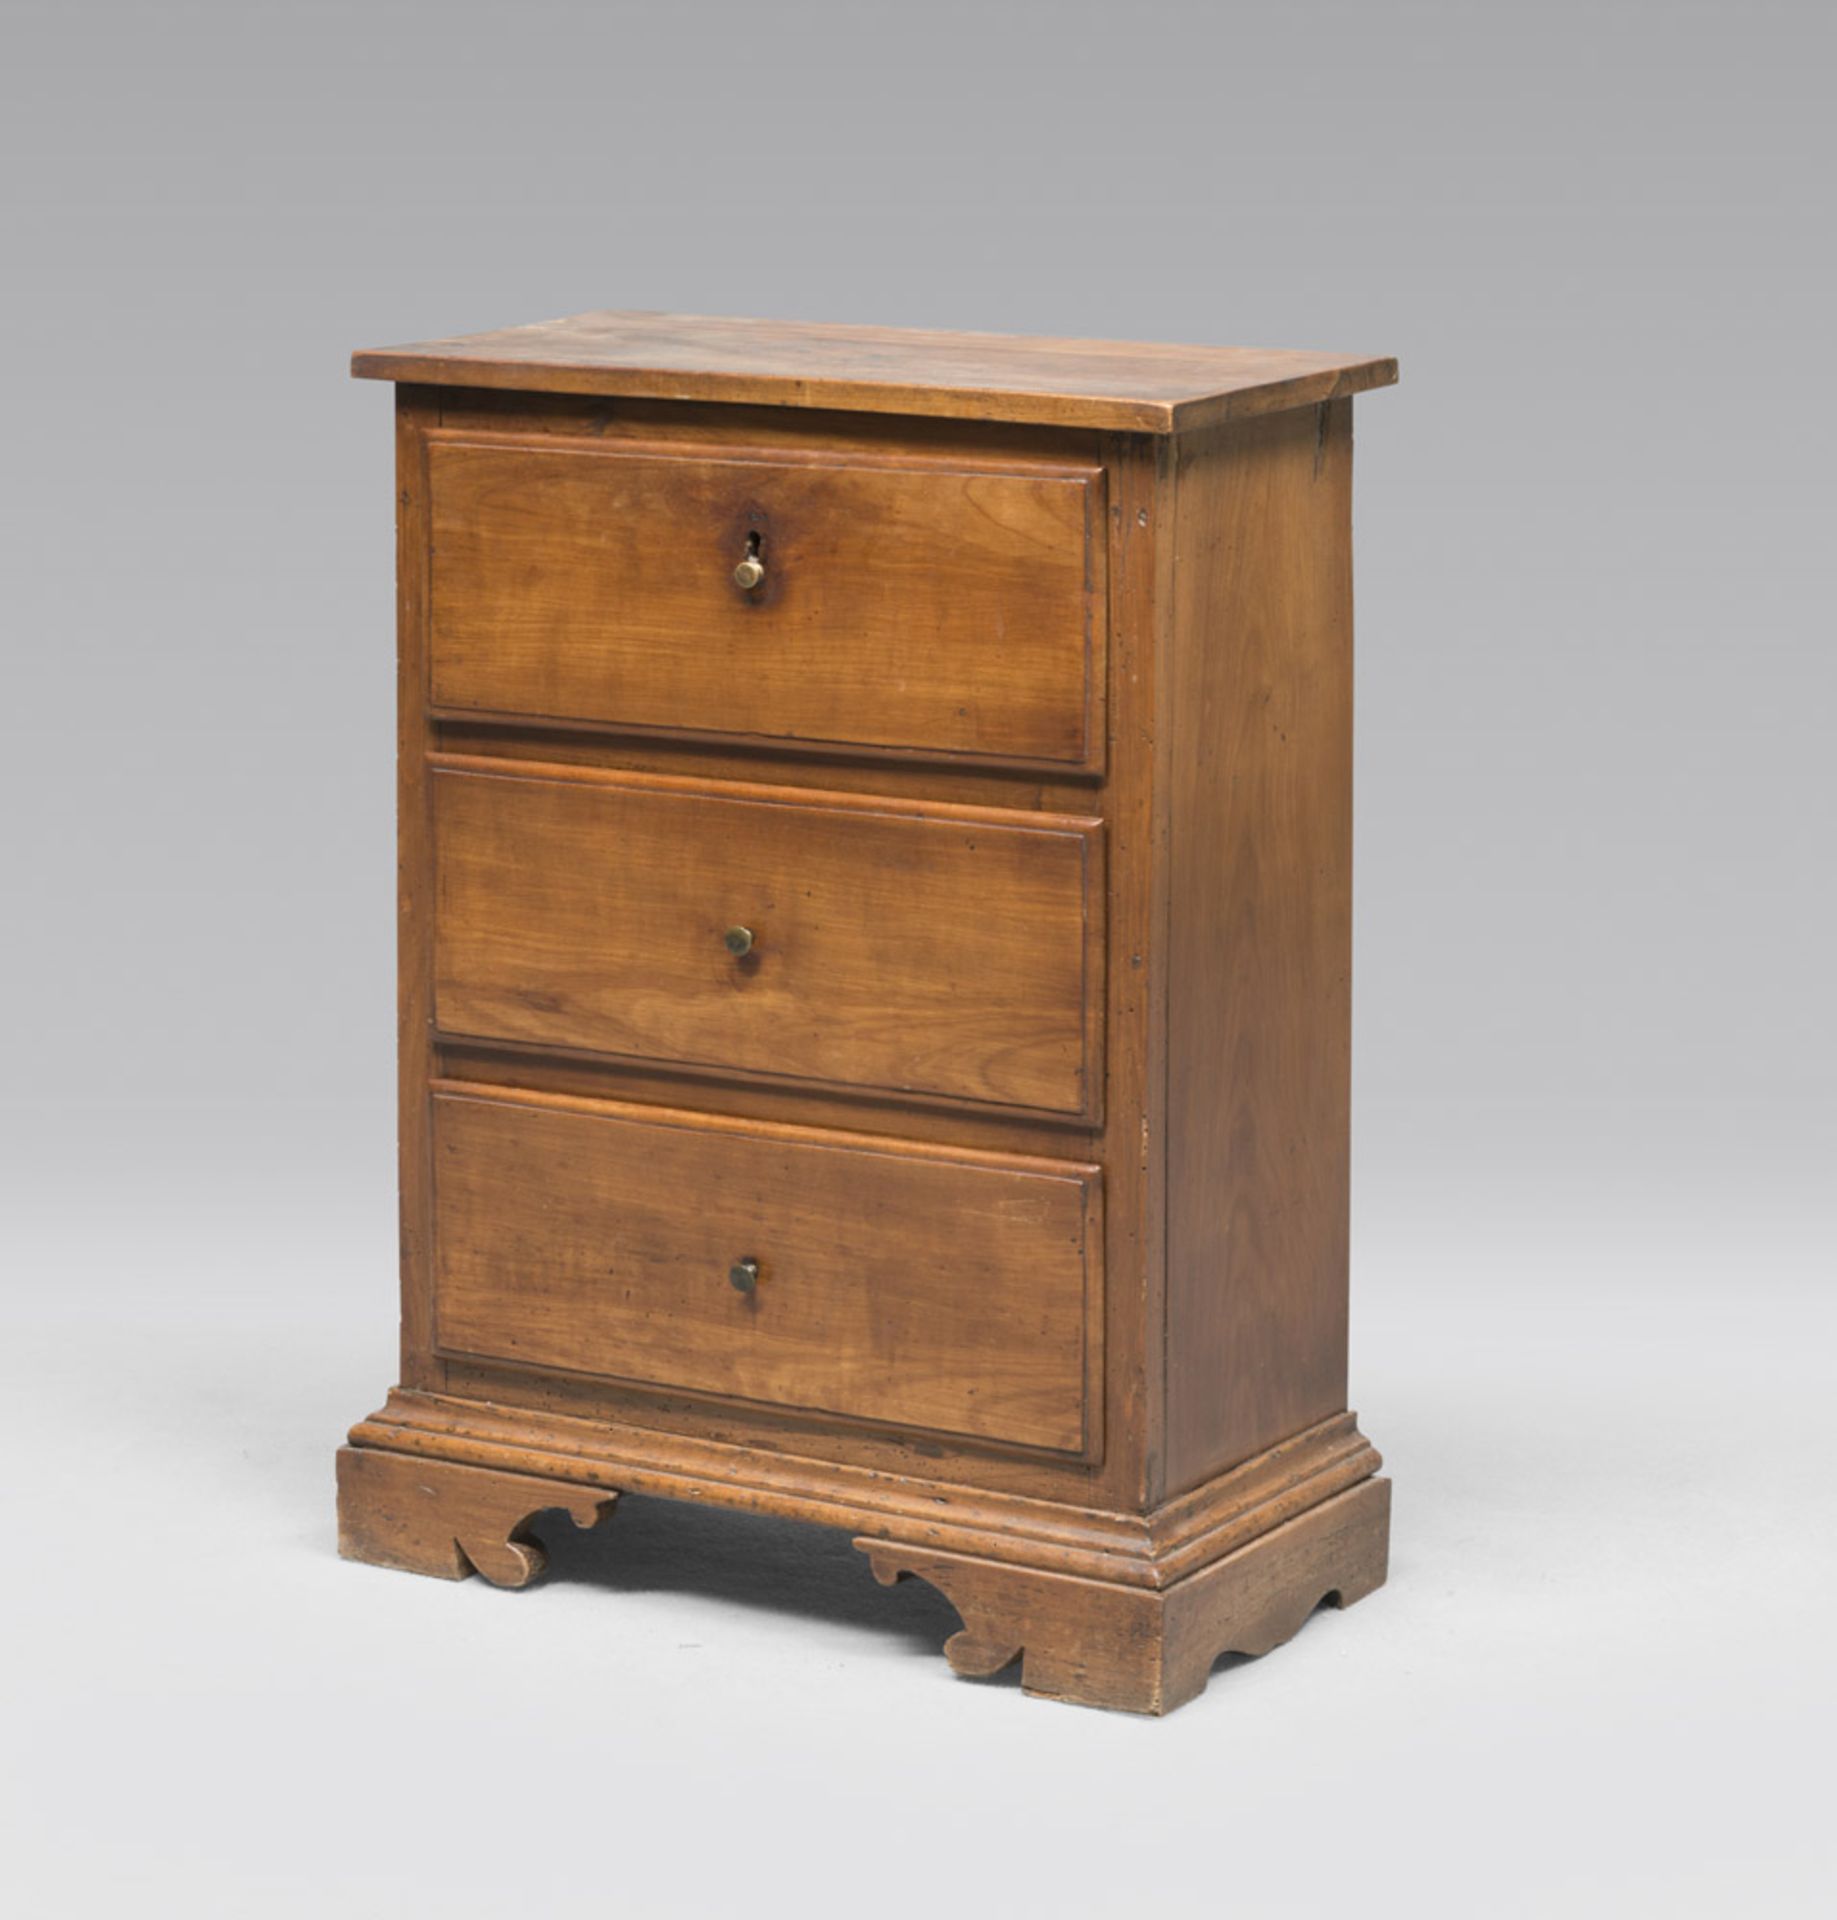 SMALL CHERRYWOOD COMO', CENTRAL ITALY, 18TH CENTURY Three drawers. Measures cm 77 x 57 x 28. PICCOLO